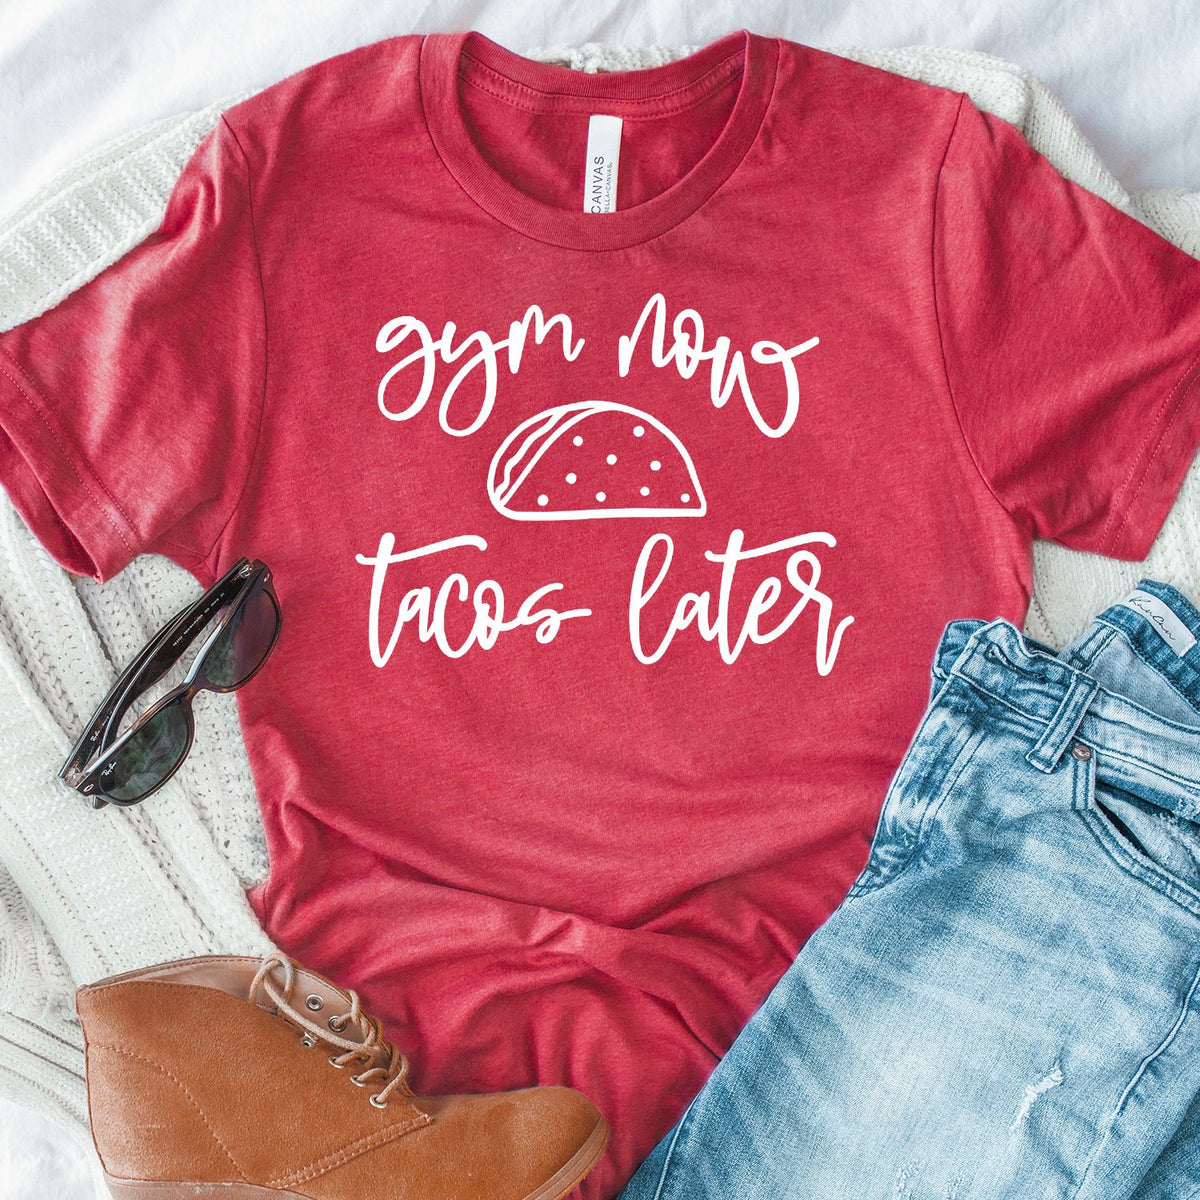 Gym Now Tacos Later - Short Sleeve Tee Shirt